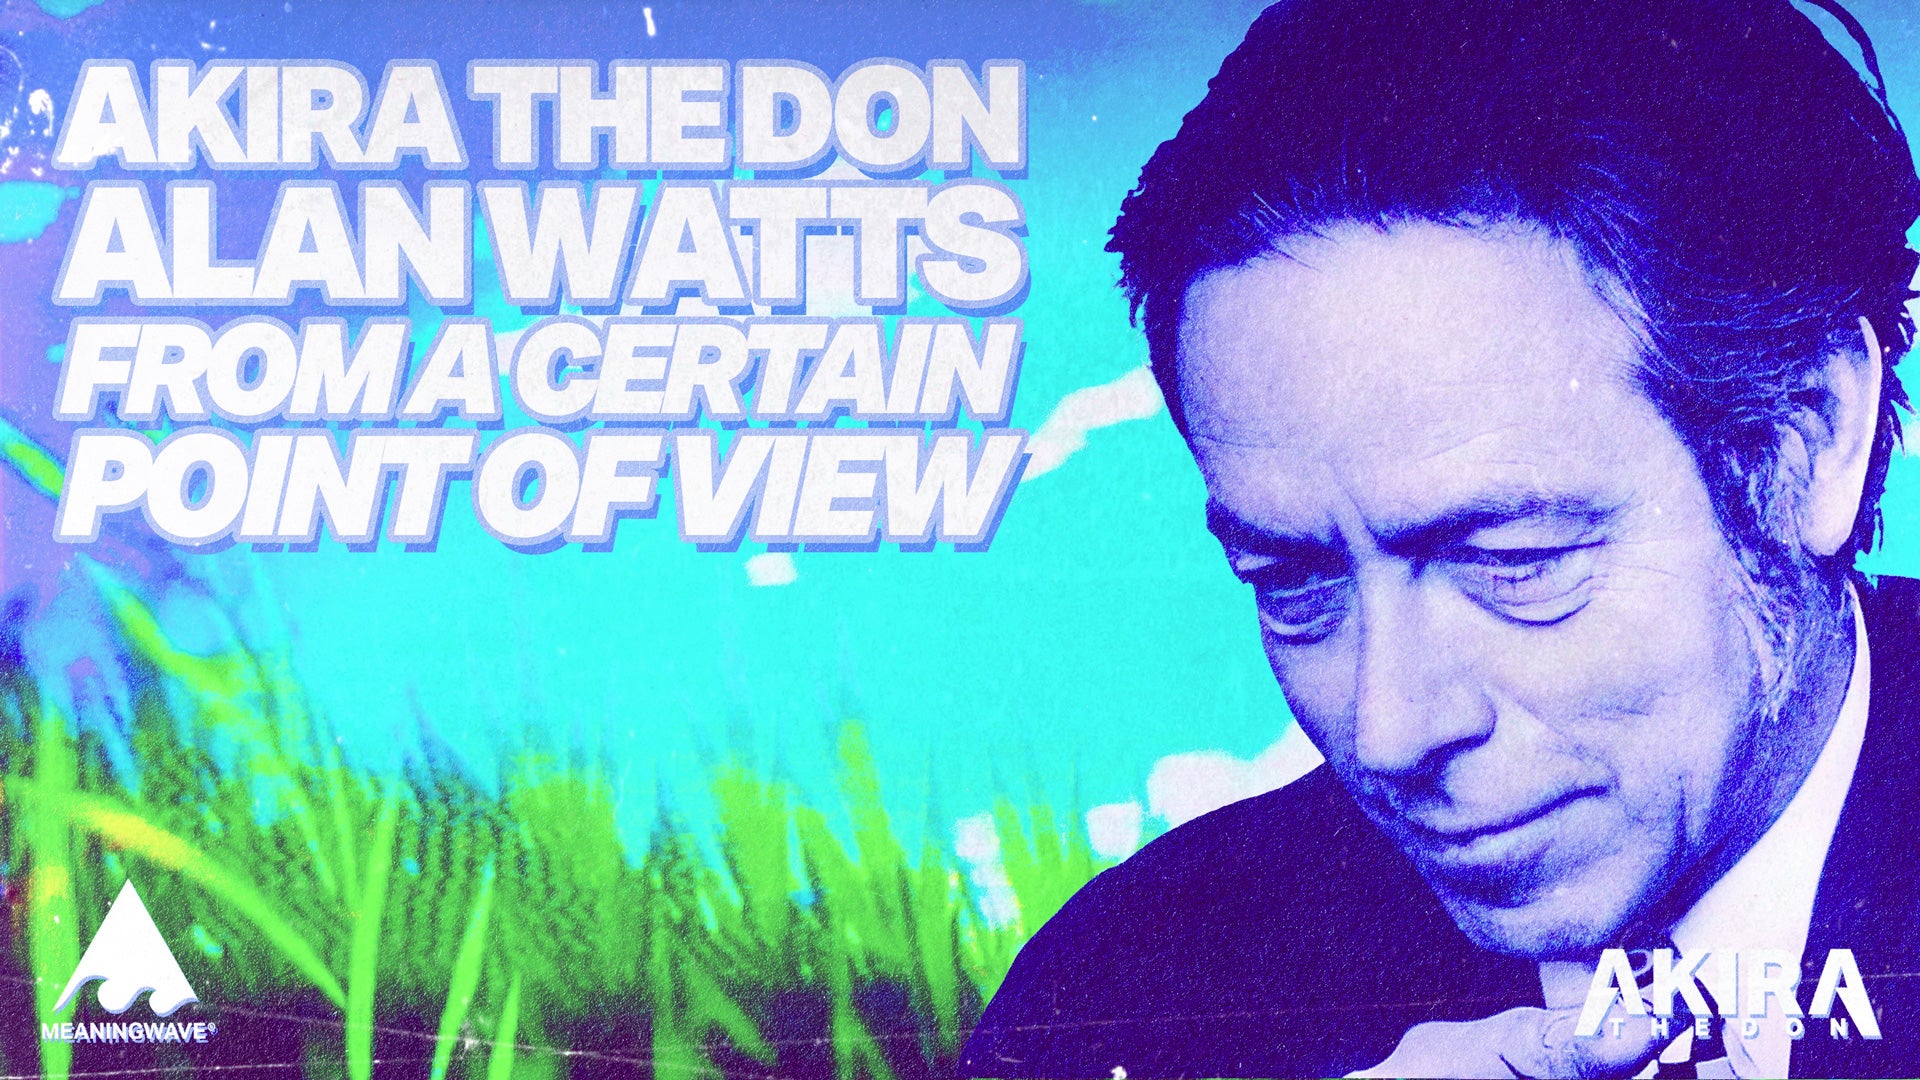 Alan Watts & Akira The Don - From A Certain Point Of View | Music Video | WATTSWAVE